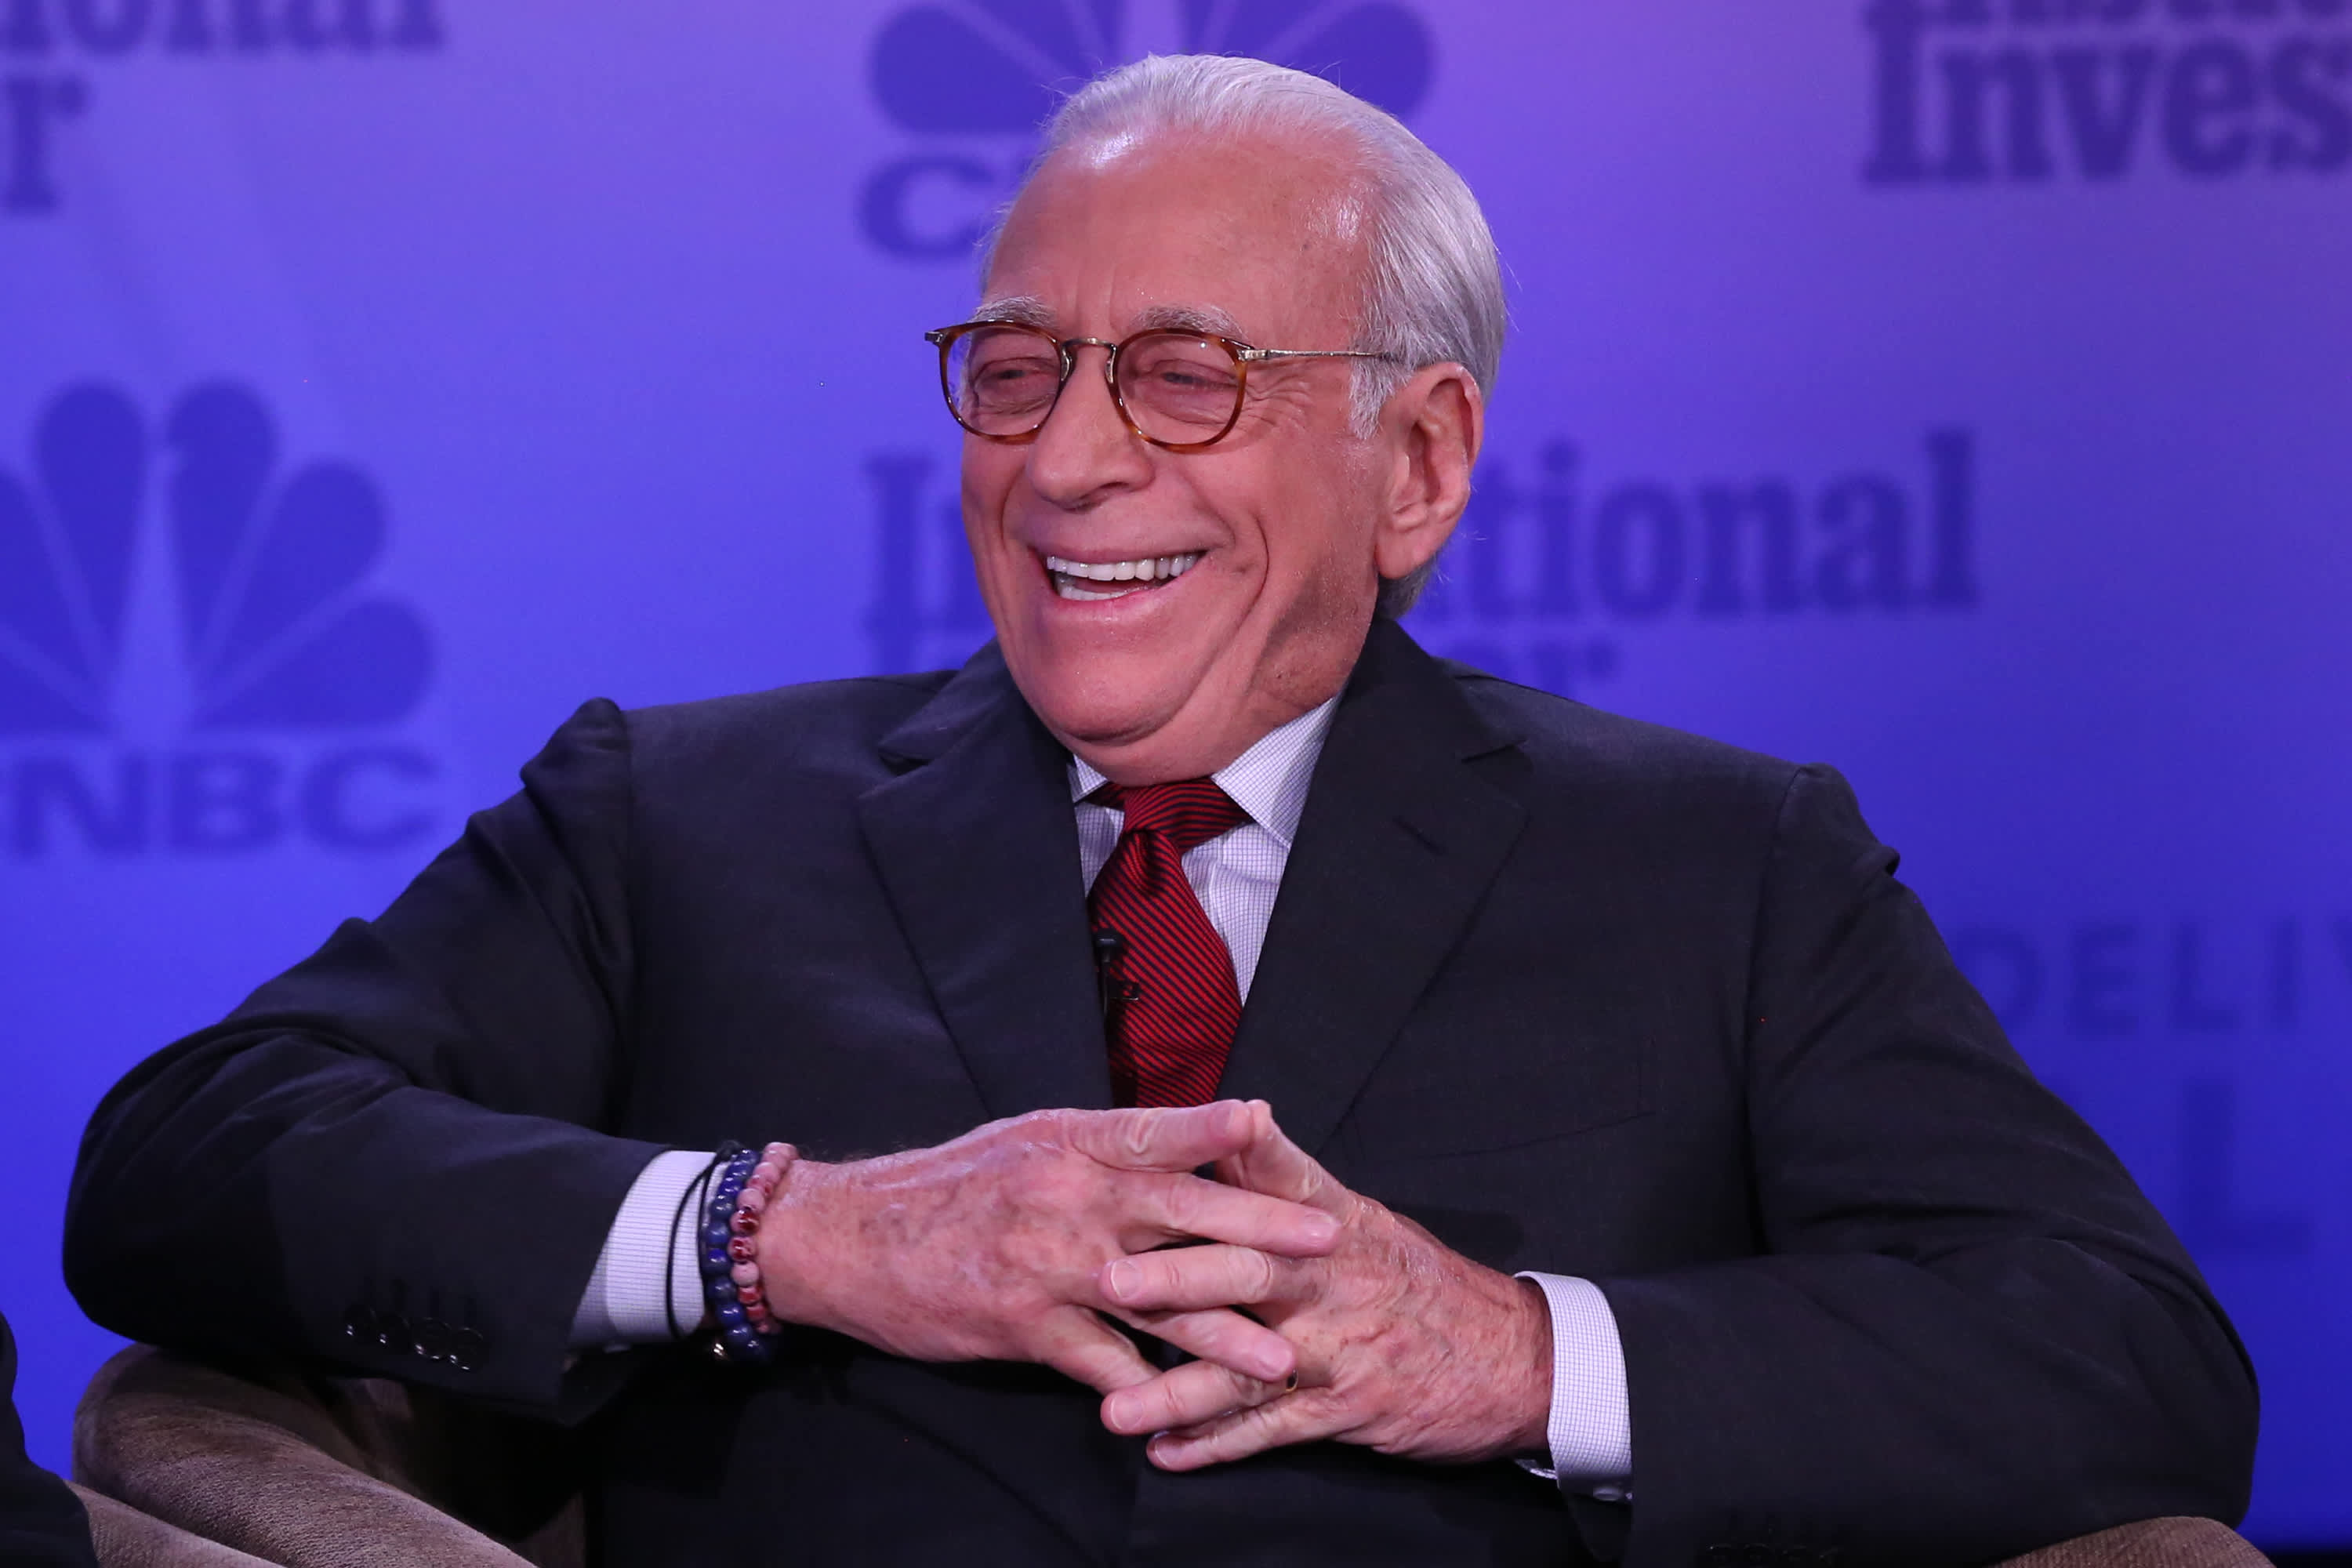 Nelson Peltz's attempt to join Disney's board of directors could enforce much-needed accountability